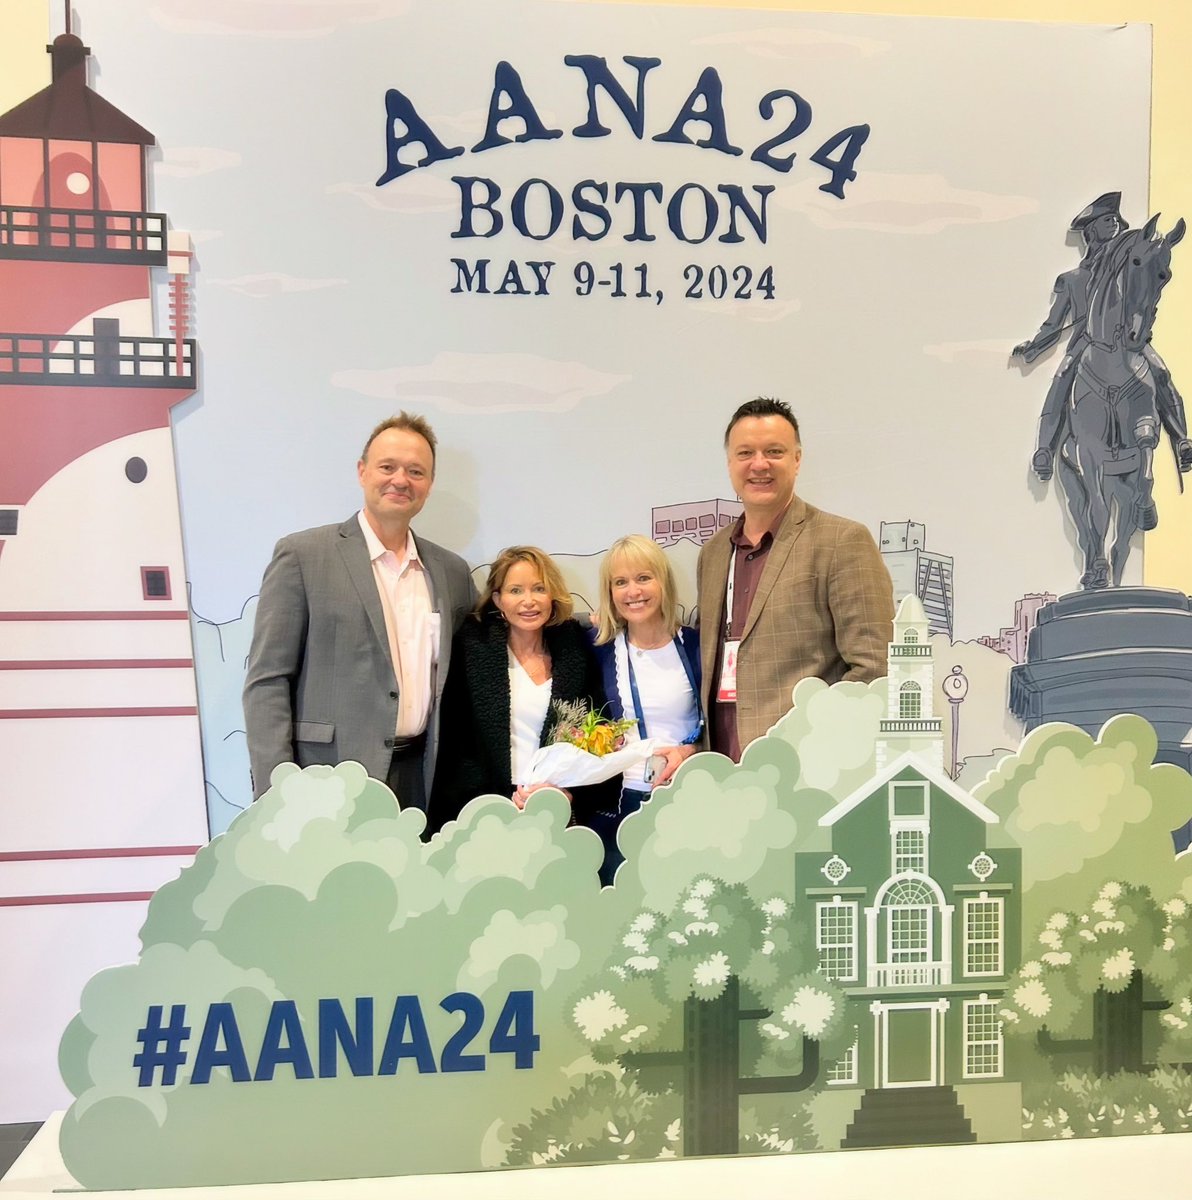 AANA President Dr. John Tokish celebrates a successful year and AANA24 with his brother and their wives. Congrats to him!